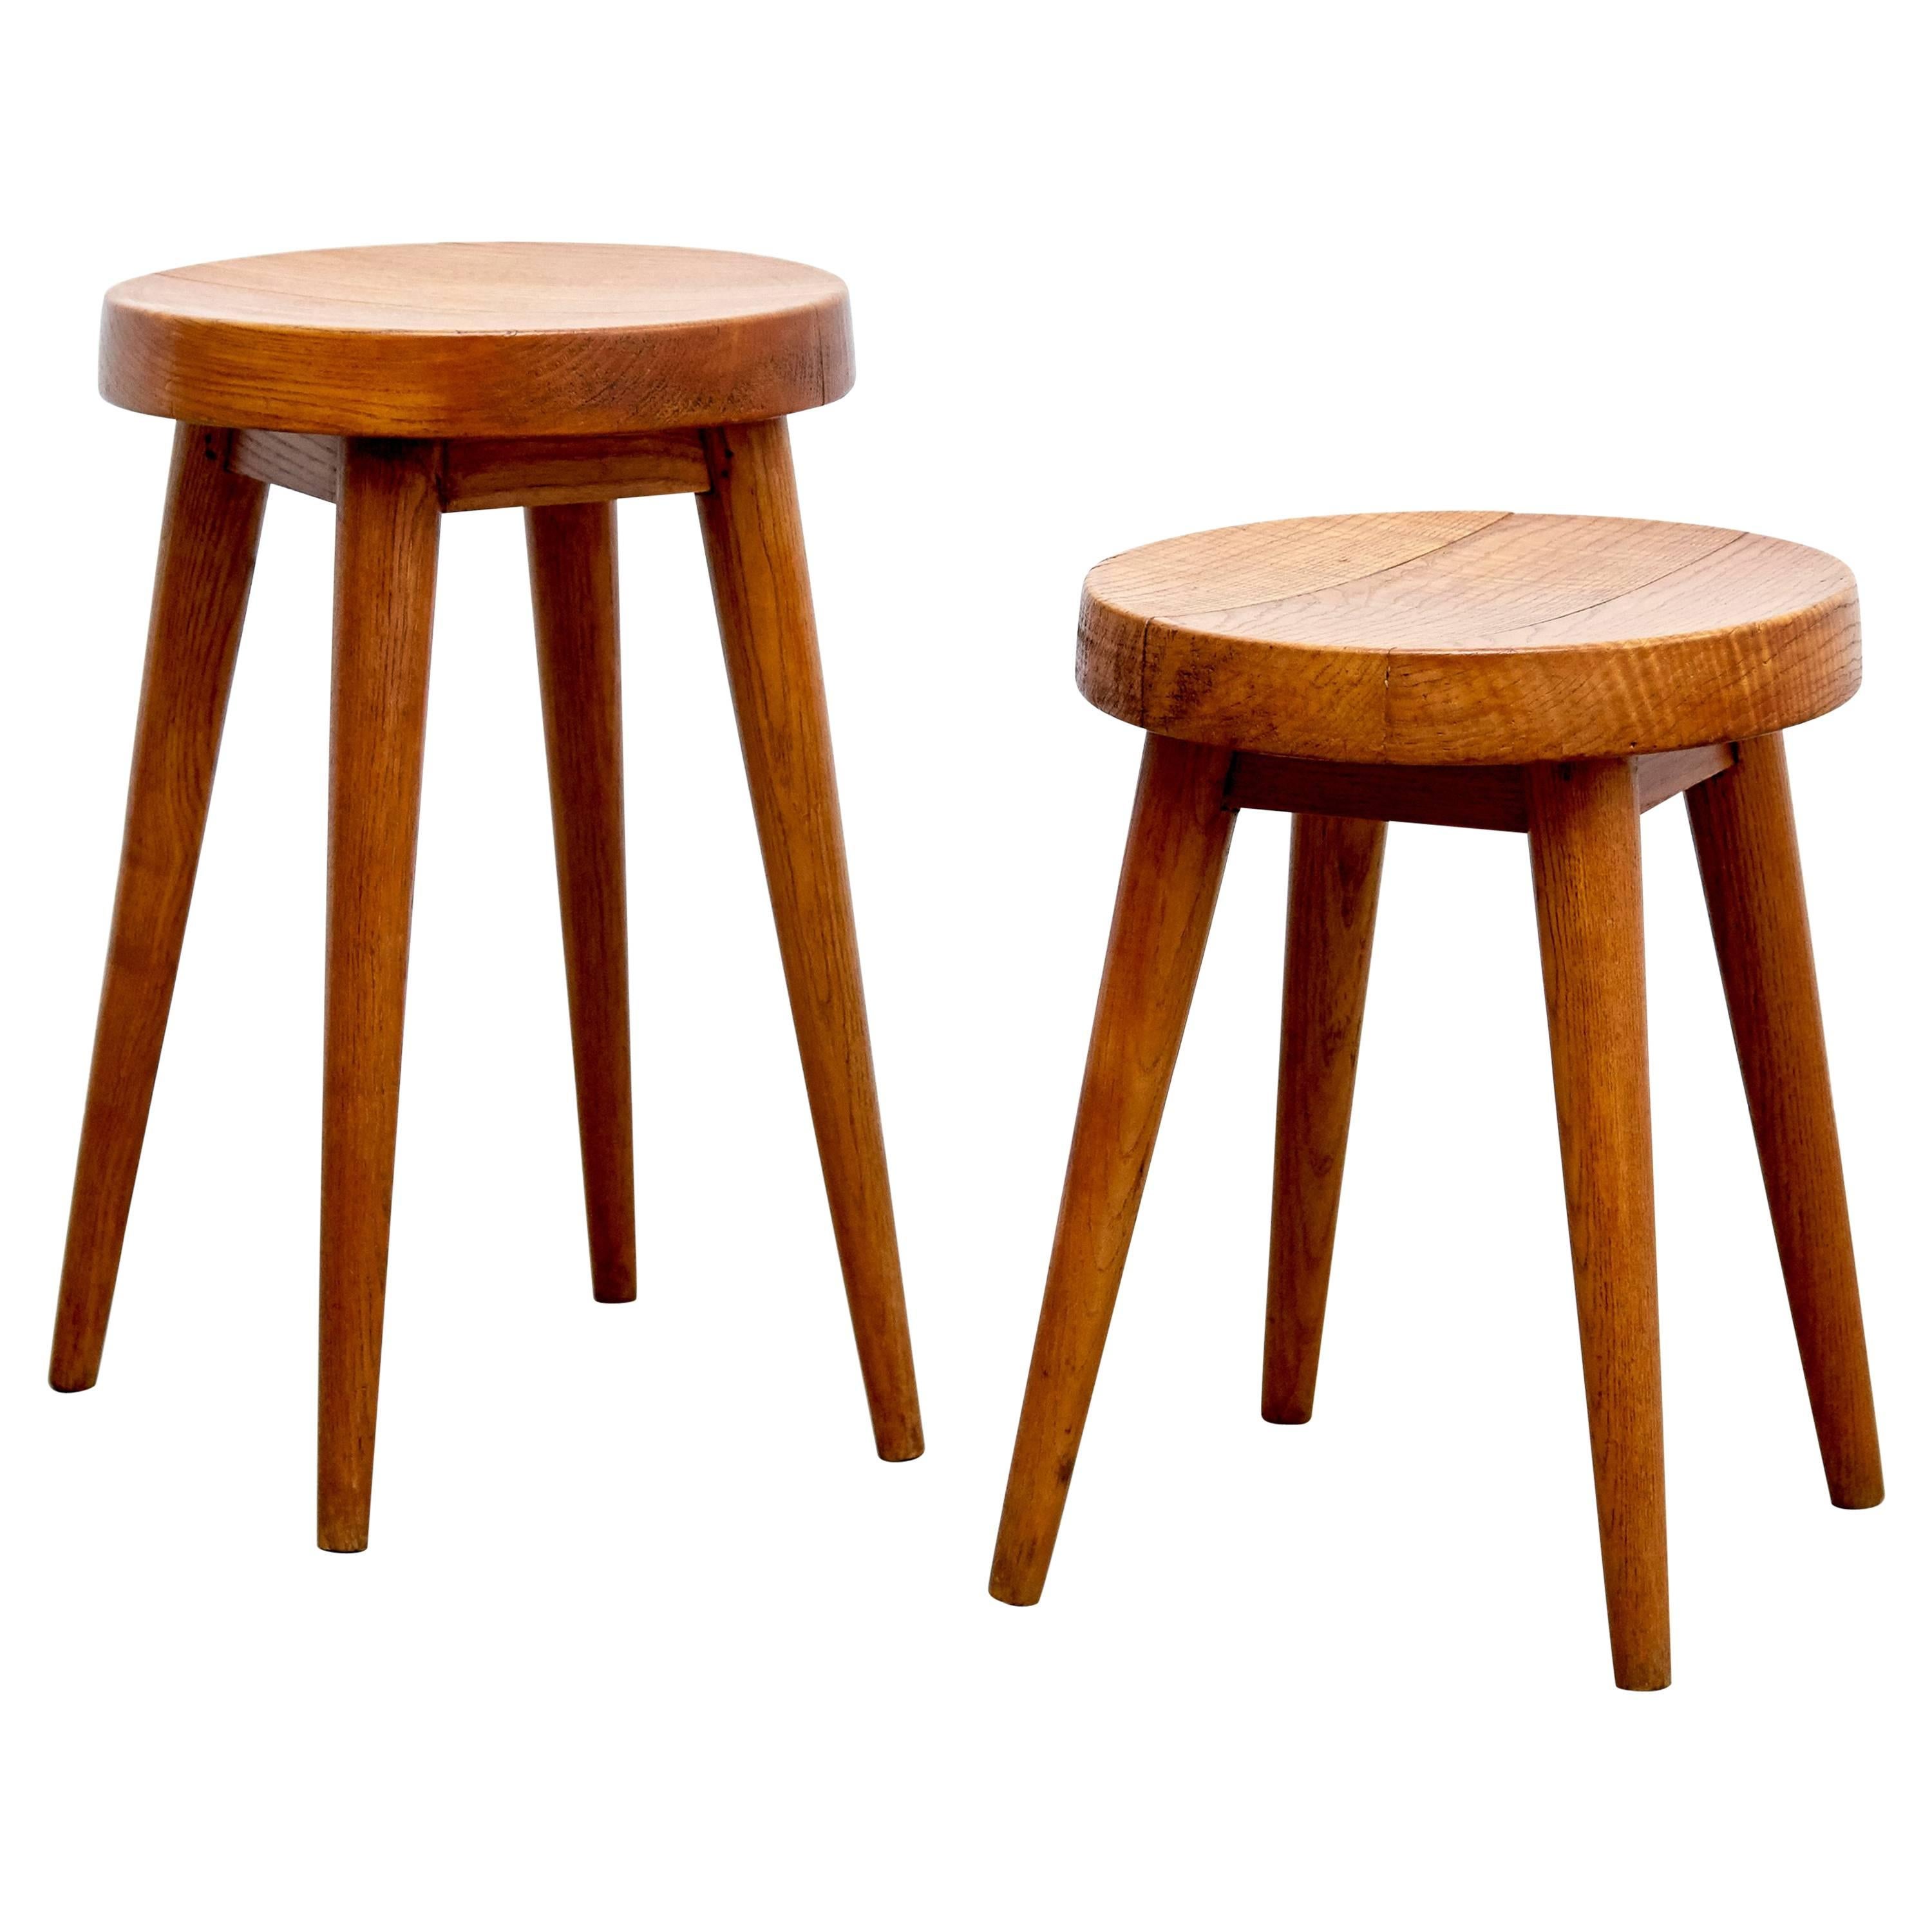 Pair of Pierre Jeanneret & Charlotte Perriand Stools